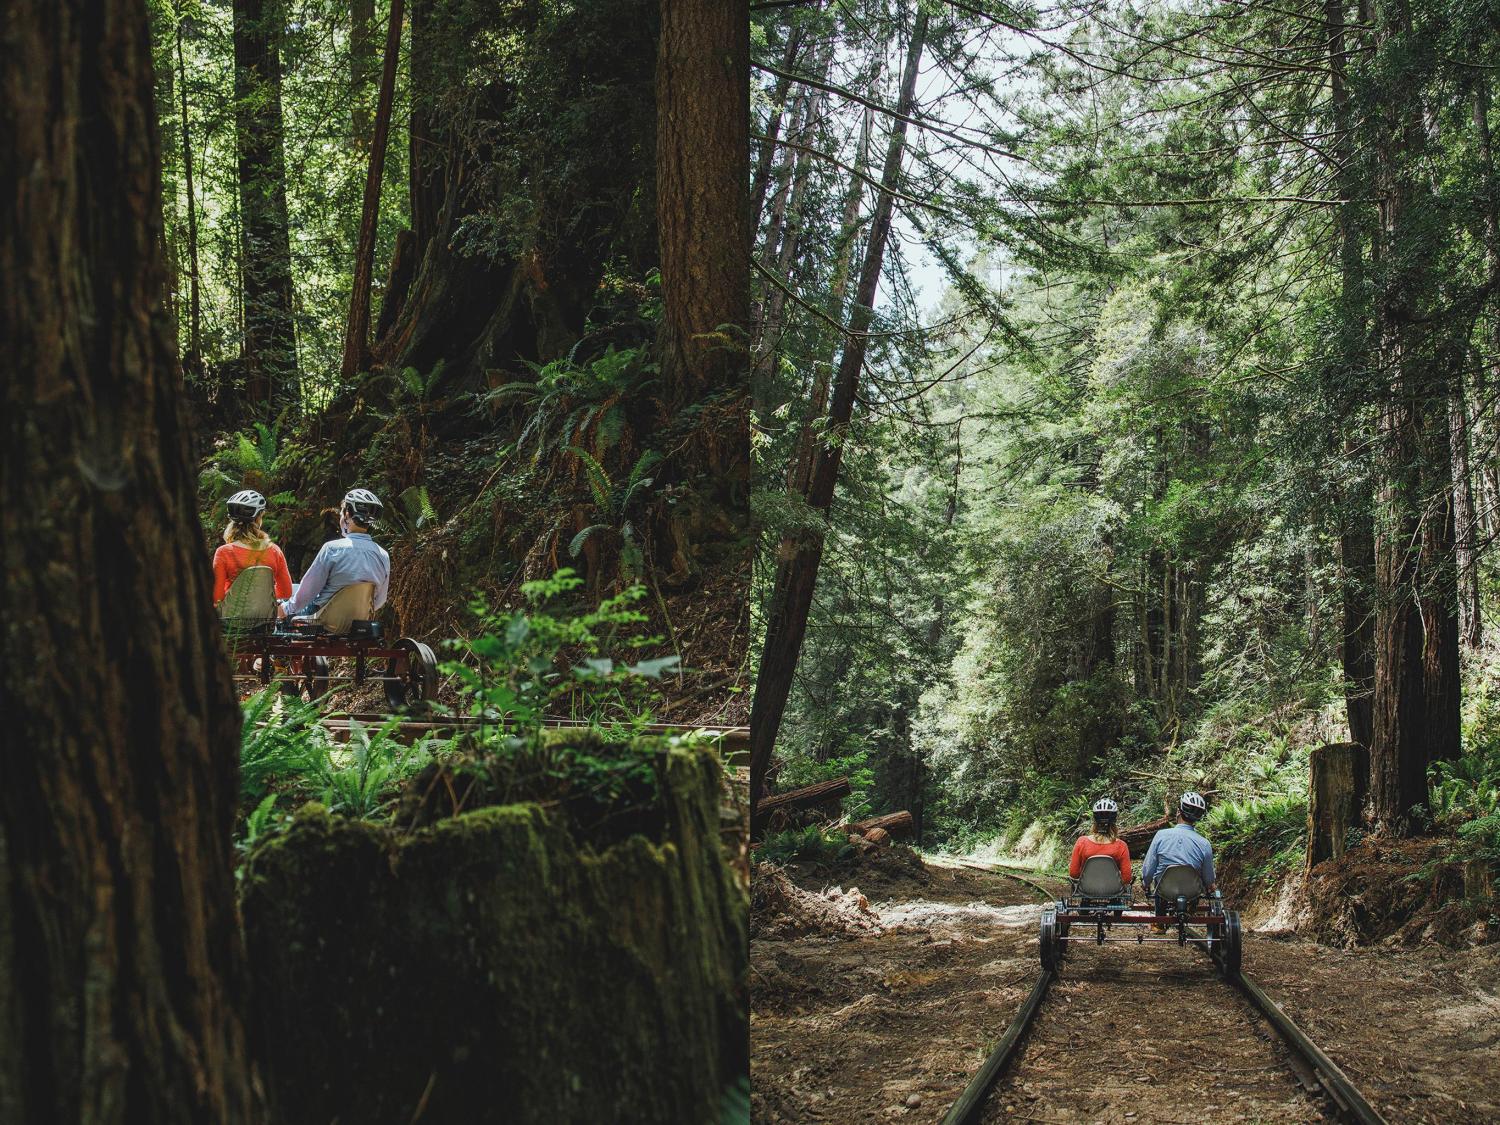 Rail Bikes Let You Pedal Through The Redwood Forest In California - Electric Railroad bicycles tour redwoods